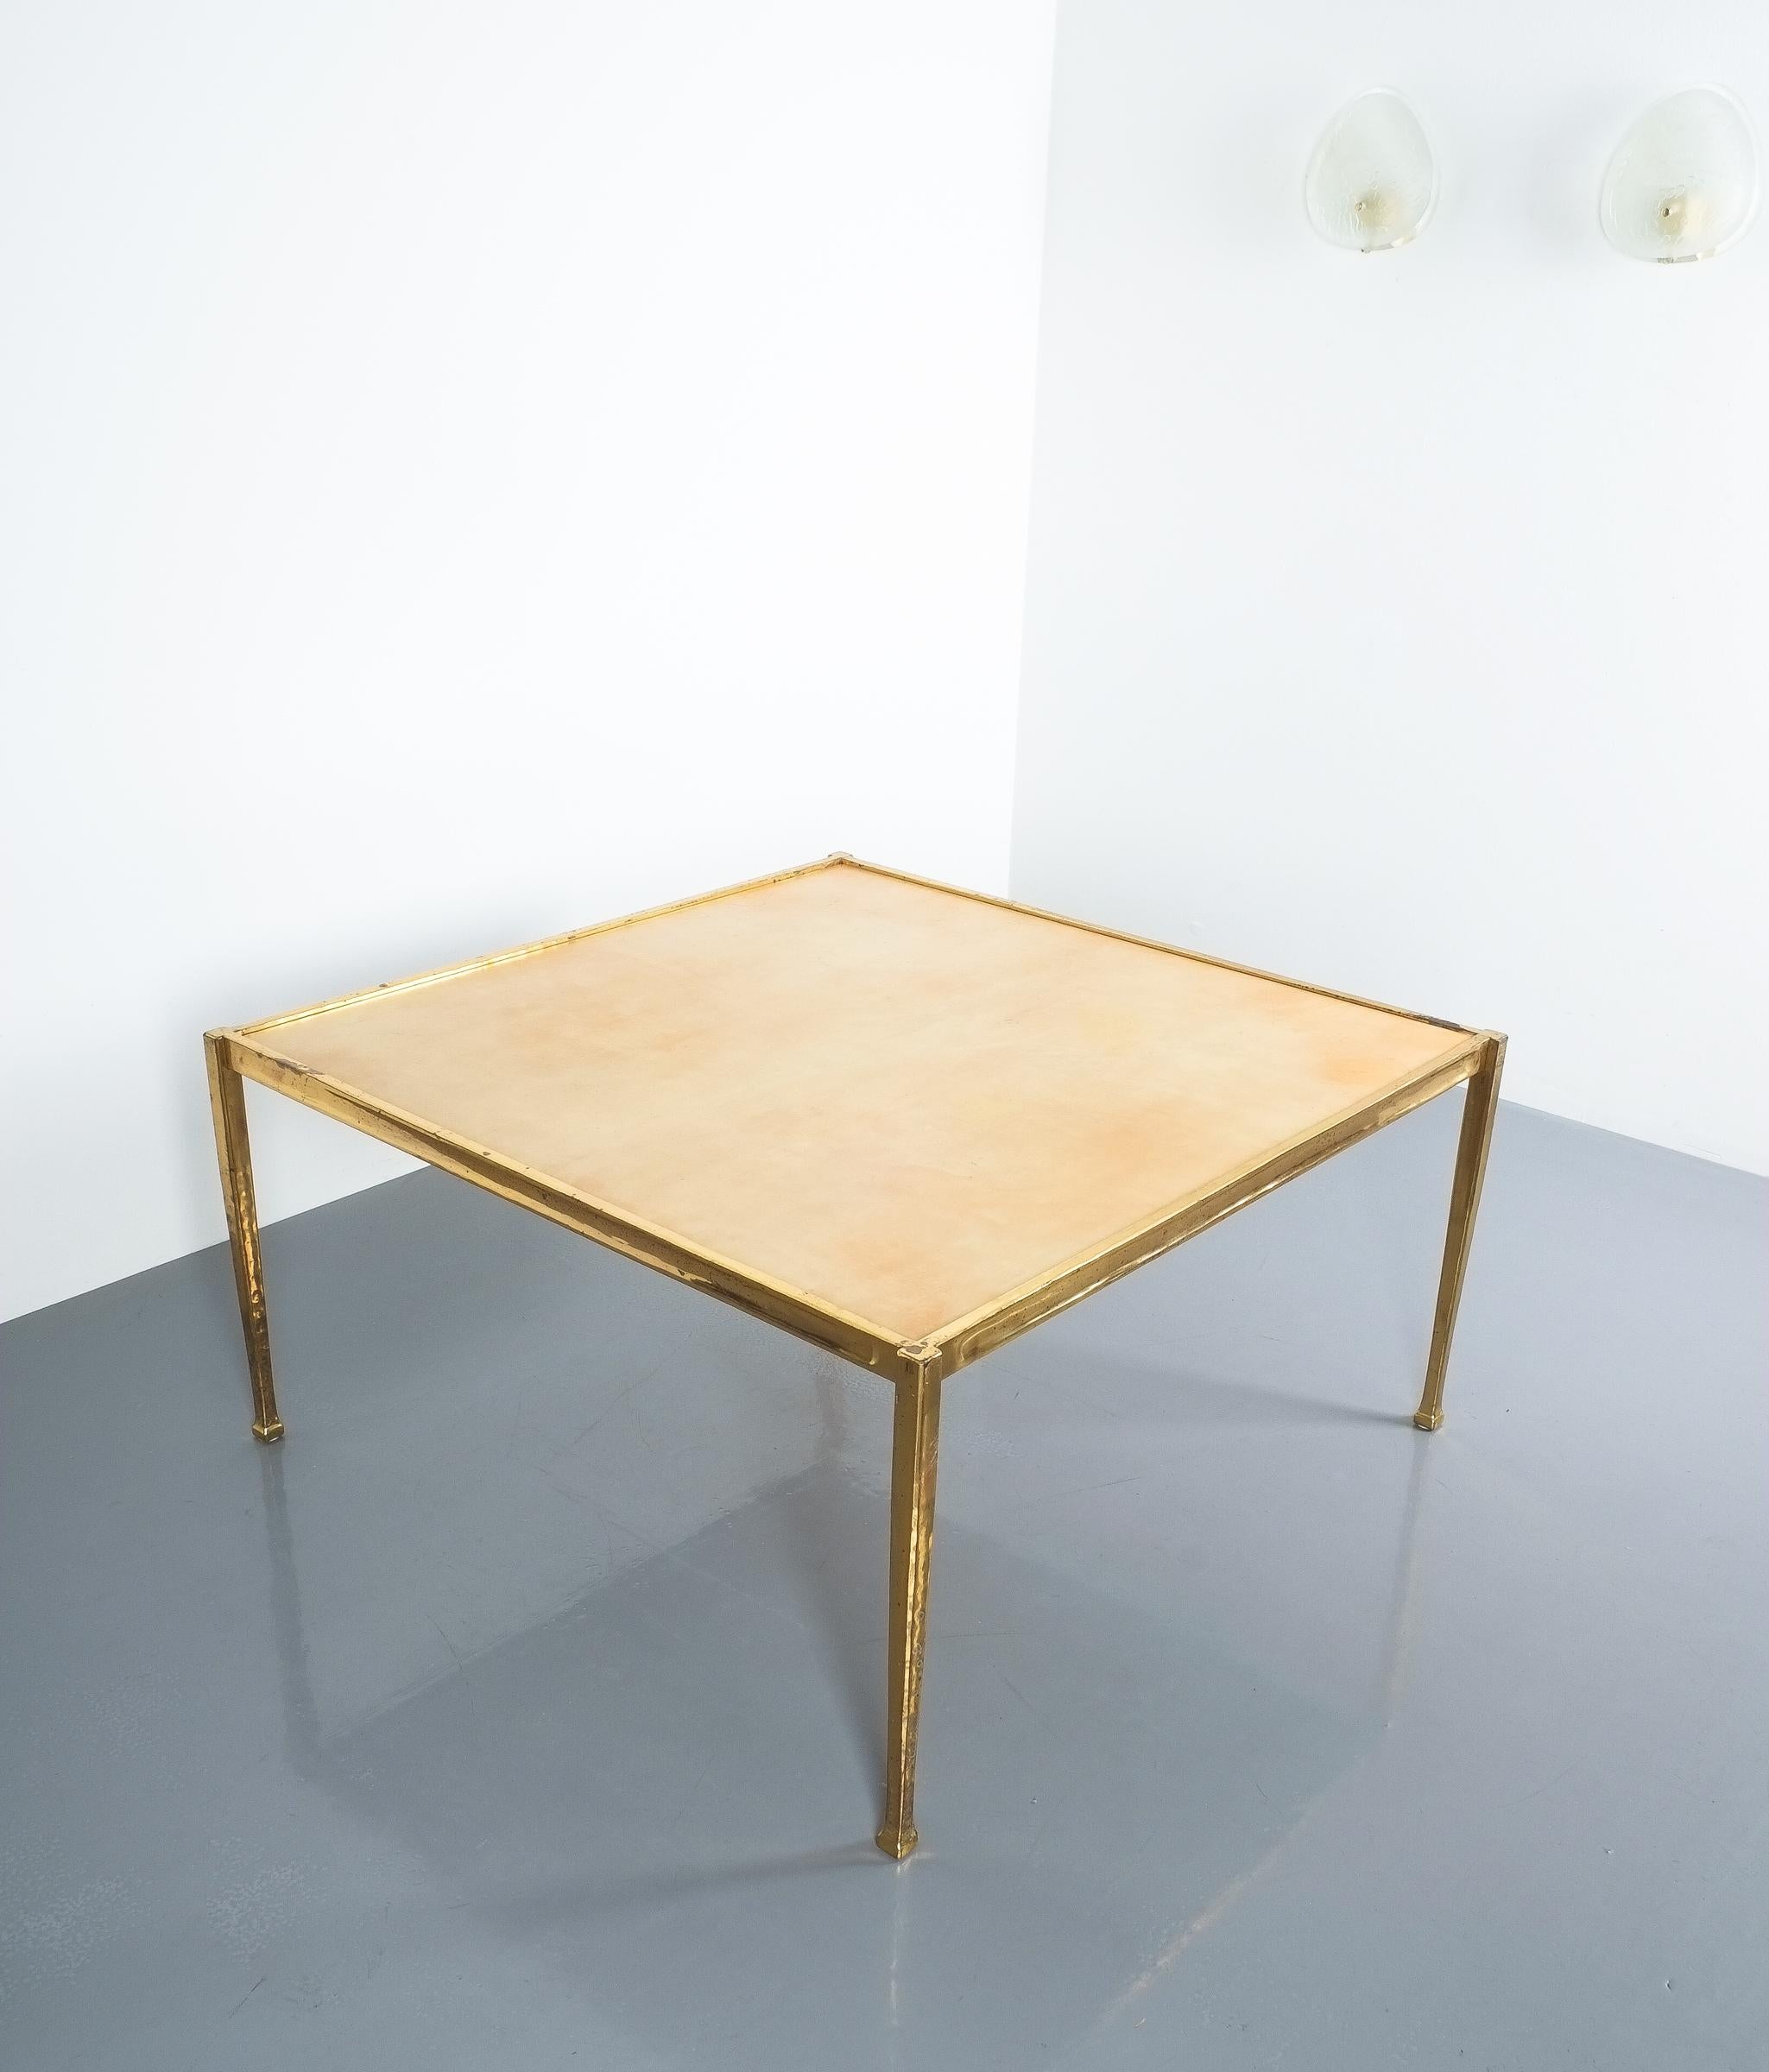 Wood Square Solid Brass Parchment Coffee Table, France, 1965 For Sale